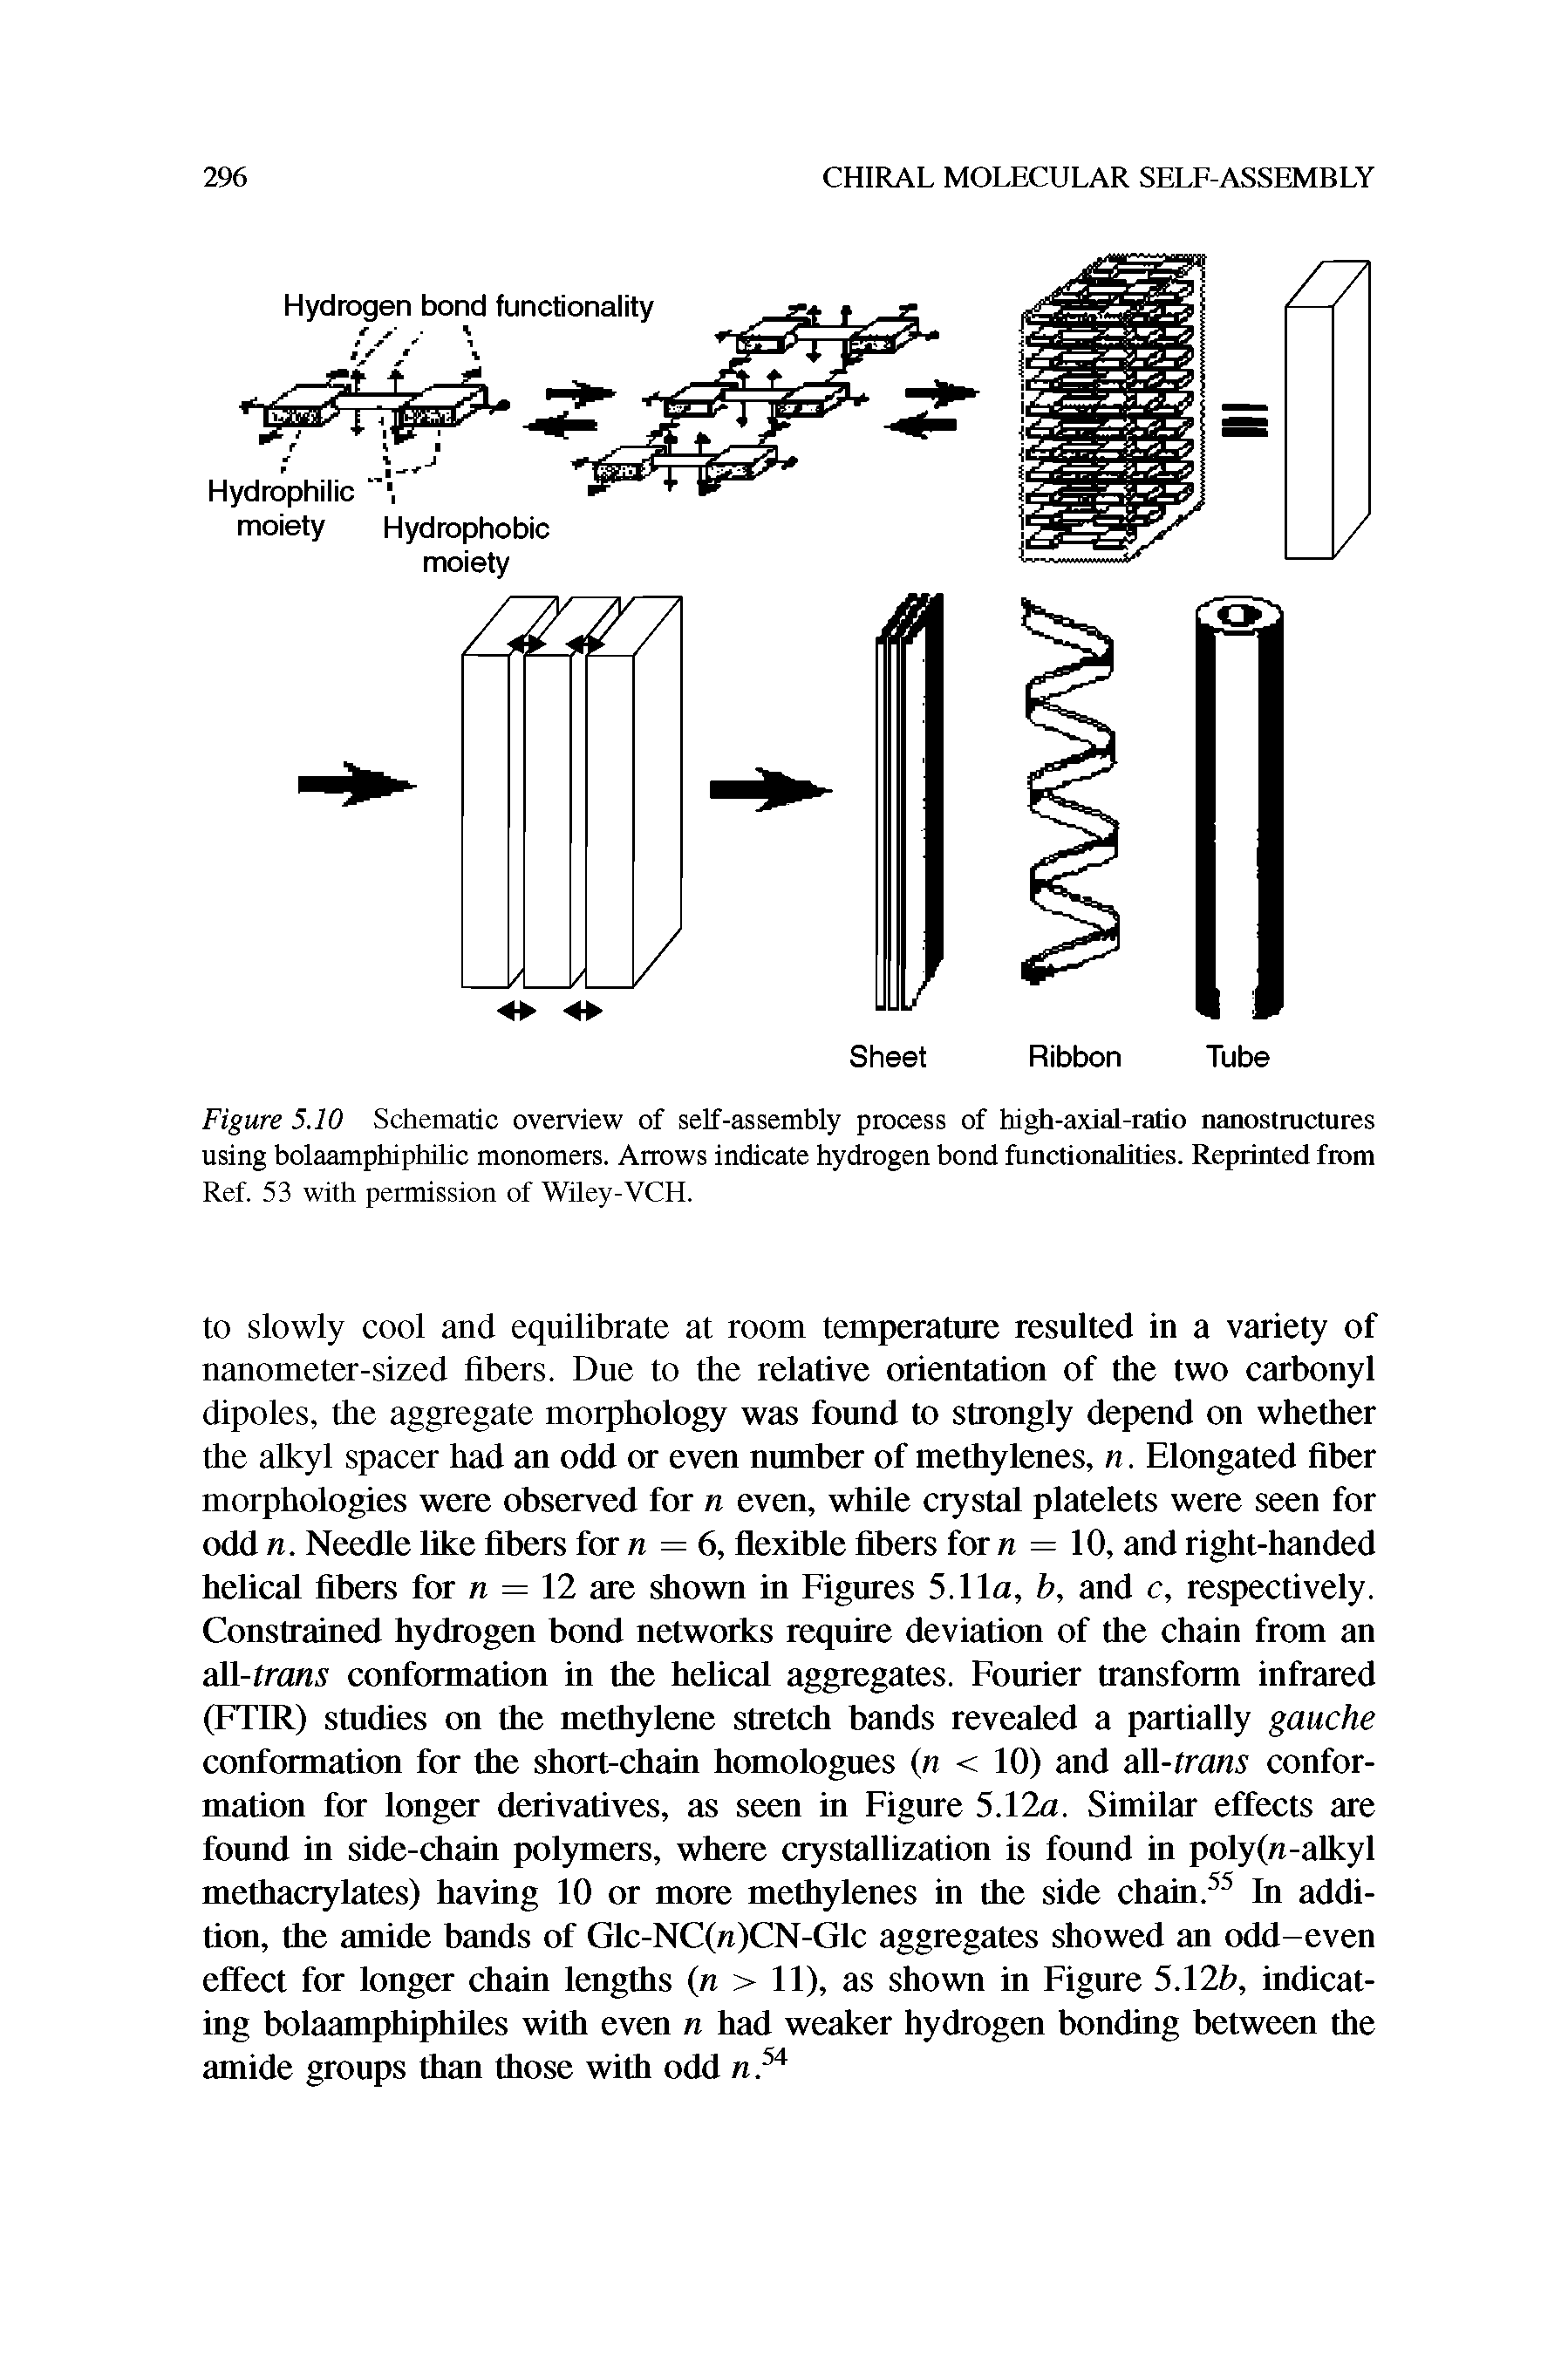 Figure 5.10 Schematic overview of self-assembly process of high-axial-ratio nanostructures using bolaamphiphilic monomers. Arrows indicate hydrogen bond functionalities. Reprinted from Ref. 53 with permission of Wiley-VCH.